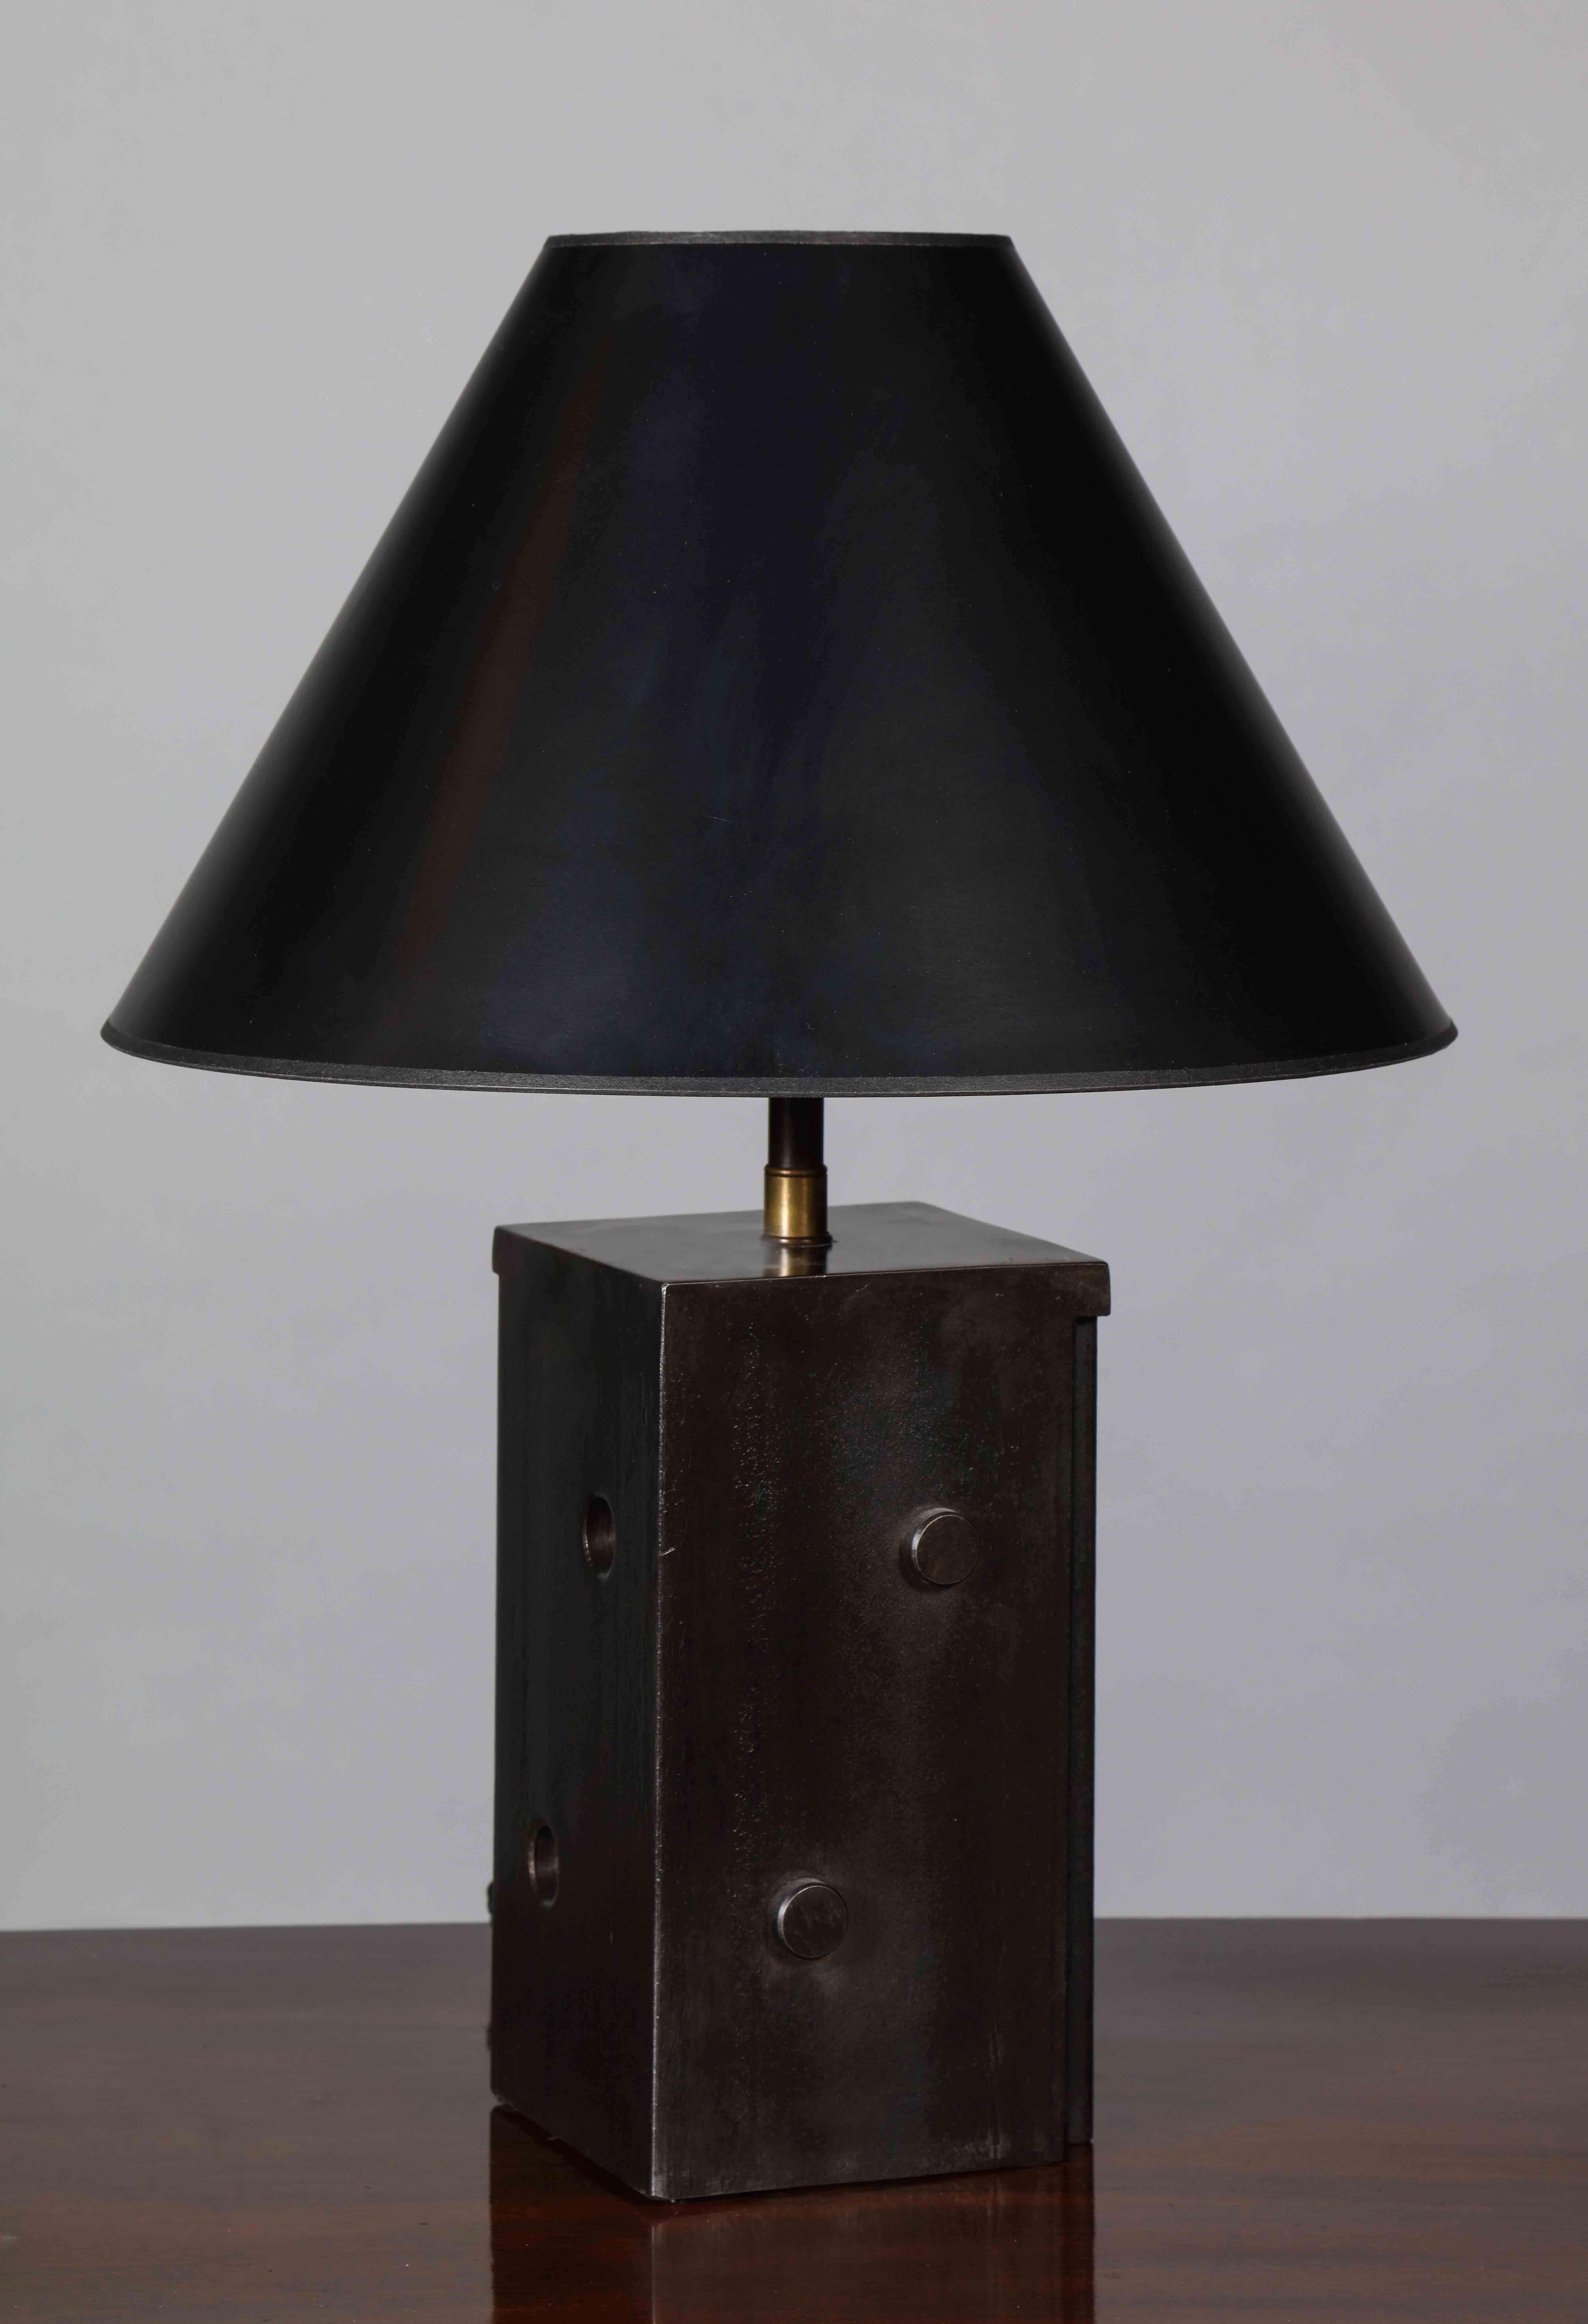 A tapering table lamp constructed from hot rolled steel with a textured yet polished surface with circular cut outs and applied details. The form playfully resembles dice, however the two negative tapered slits, within the rectangular body,